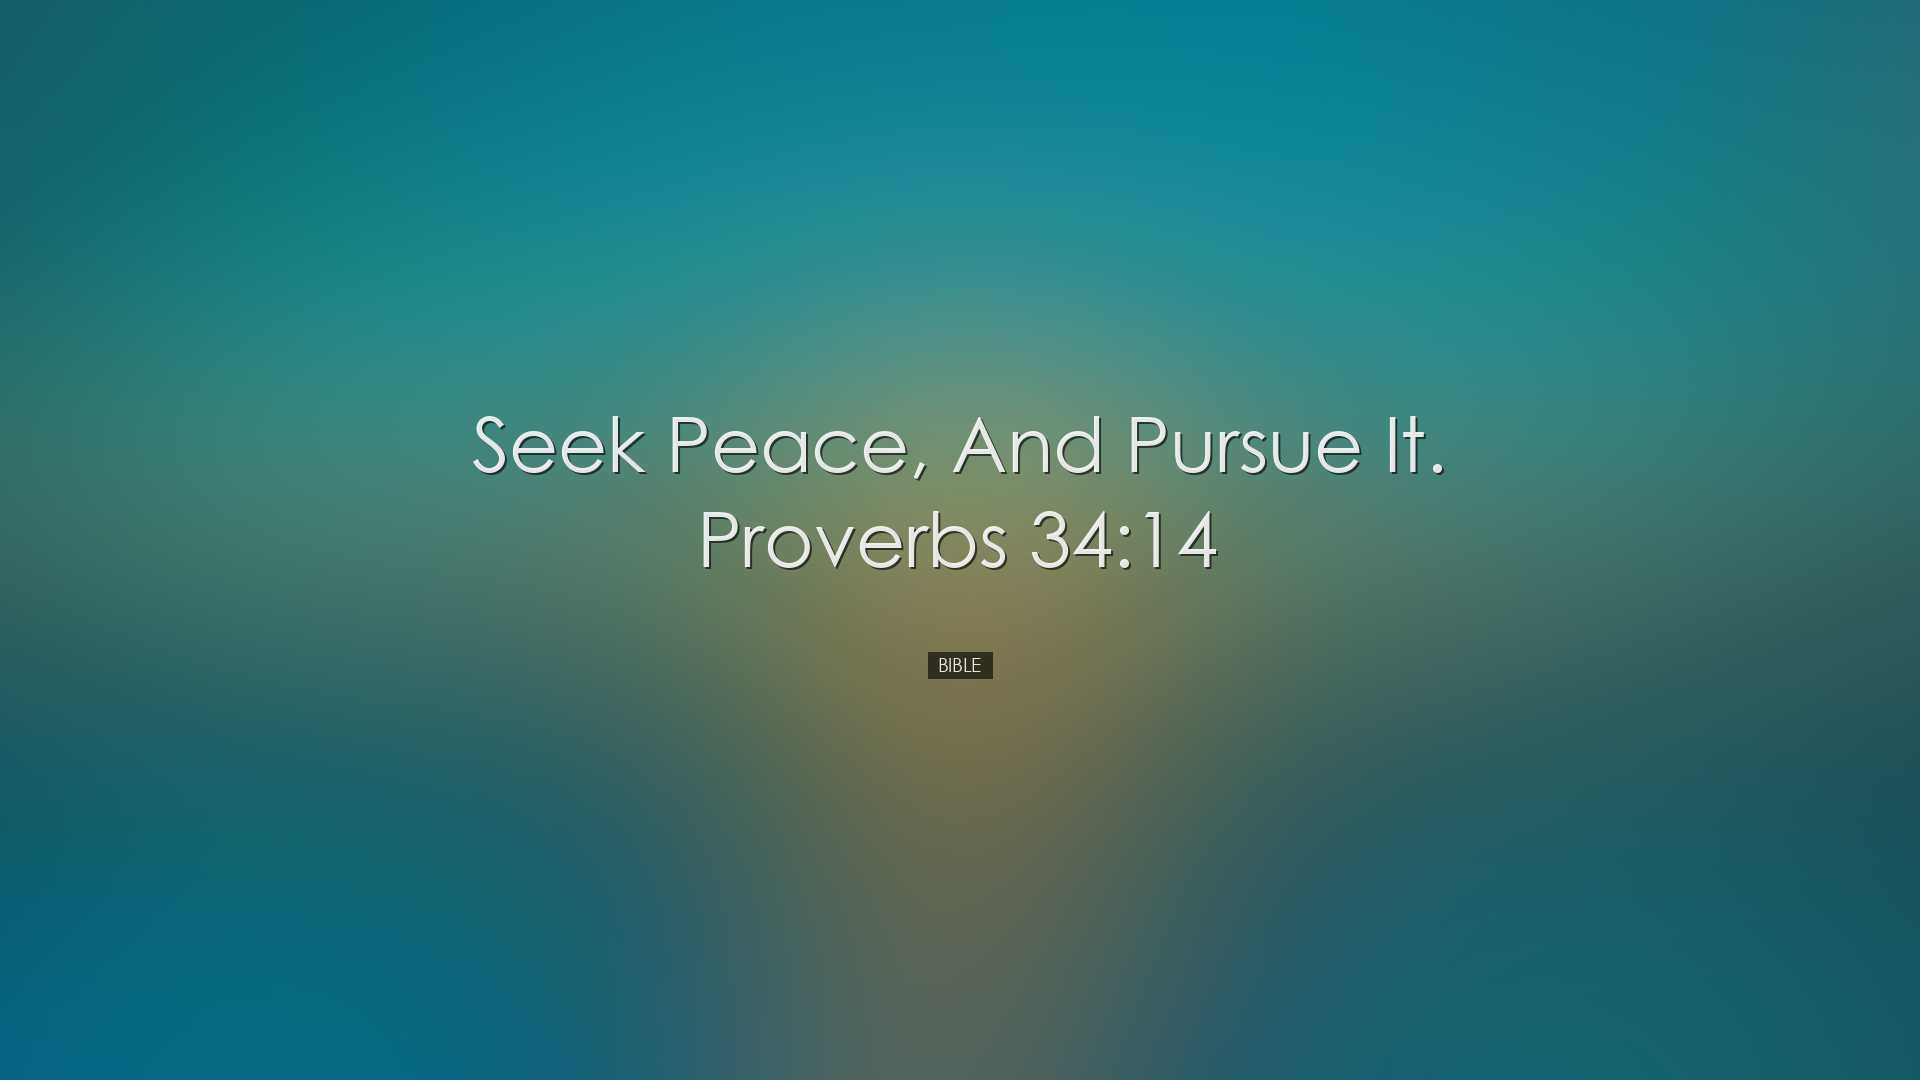 Seek peace, and pursue it. Proverbs 34:14 - Bible